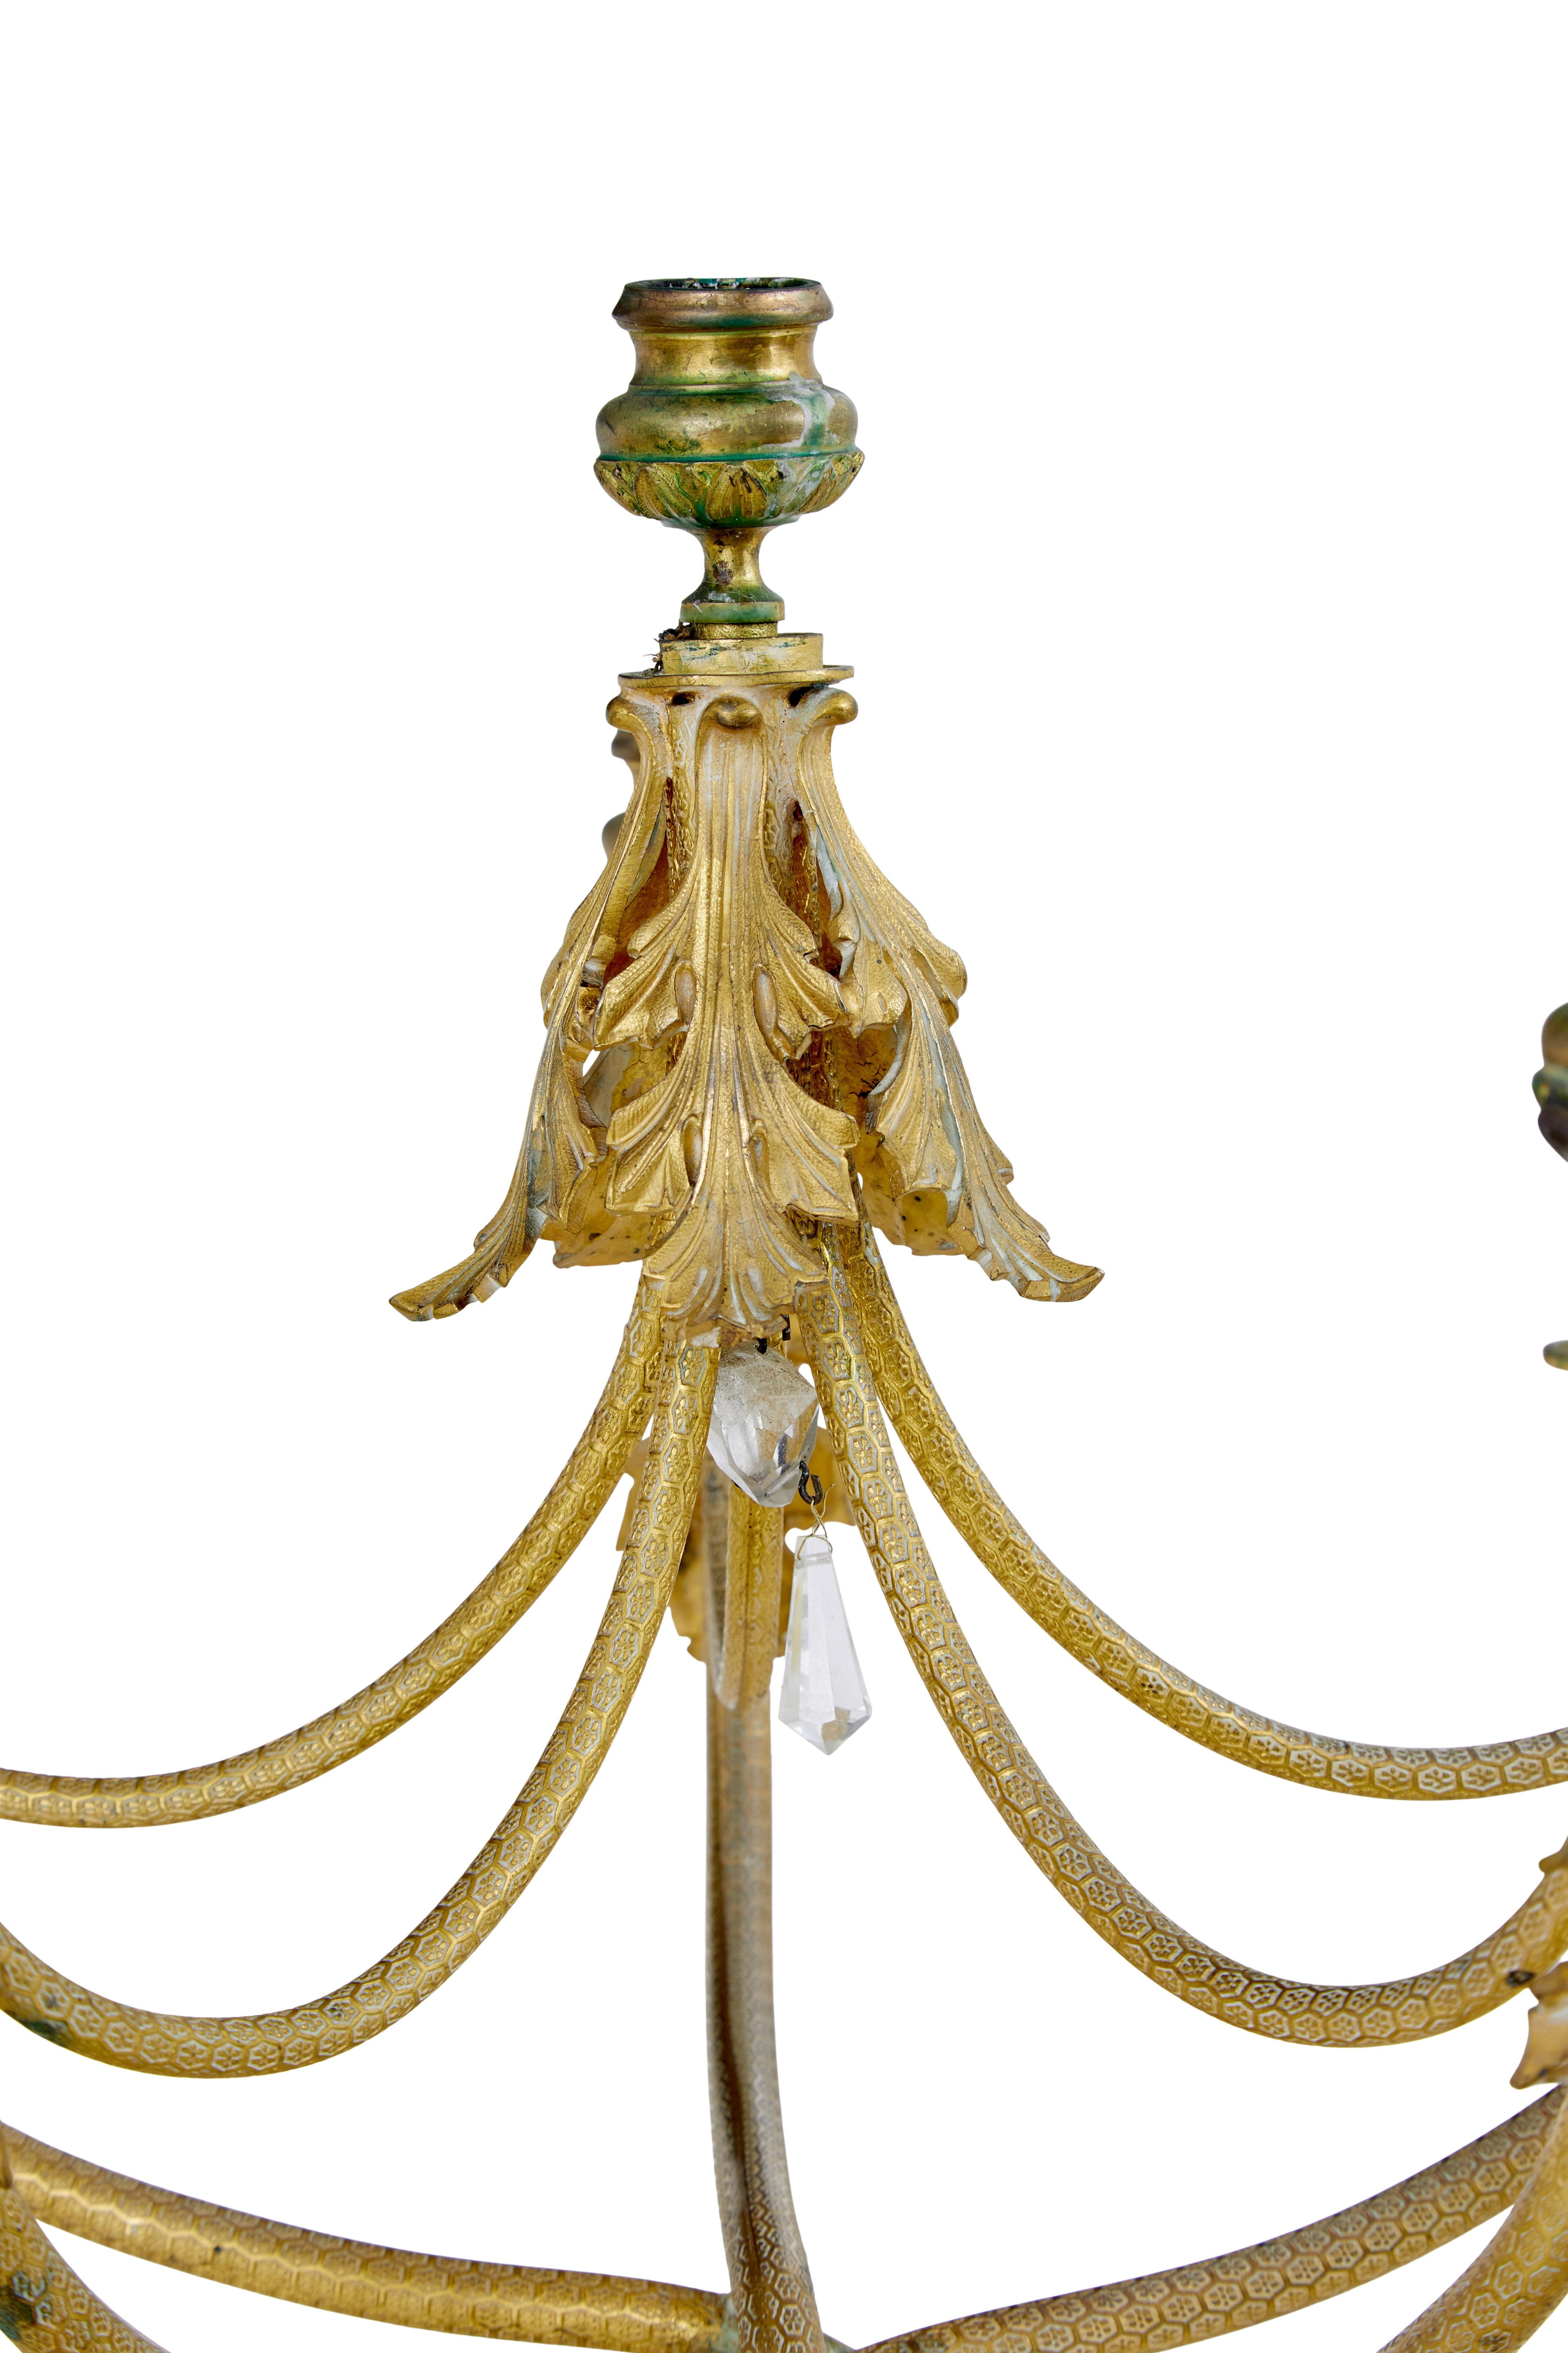 Rococo Revival 19th century French ormolu six-candle candelabra For Sale